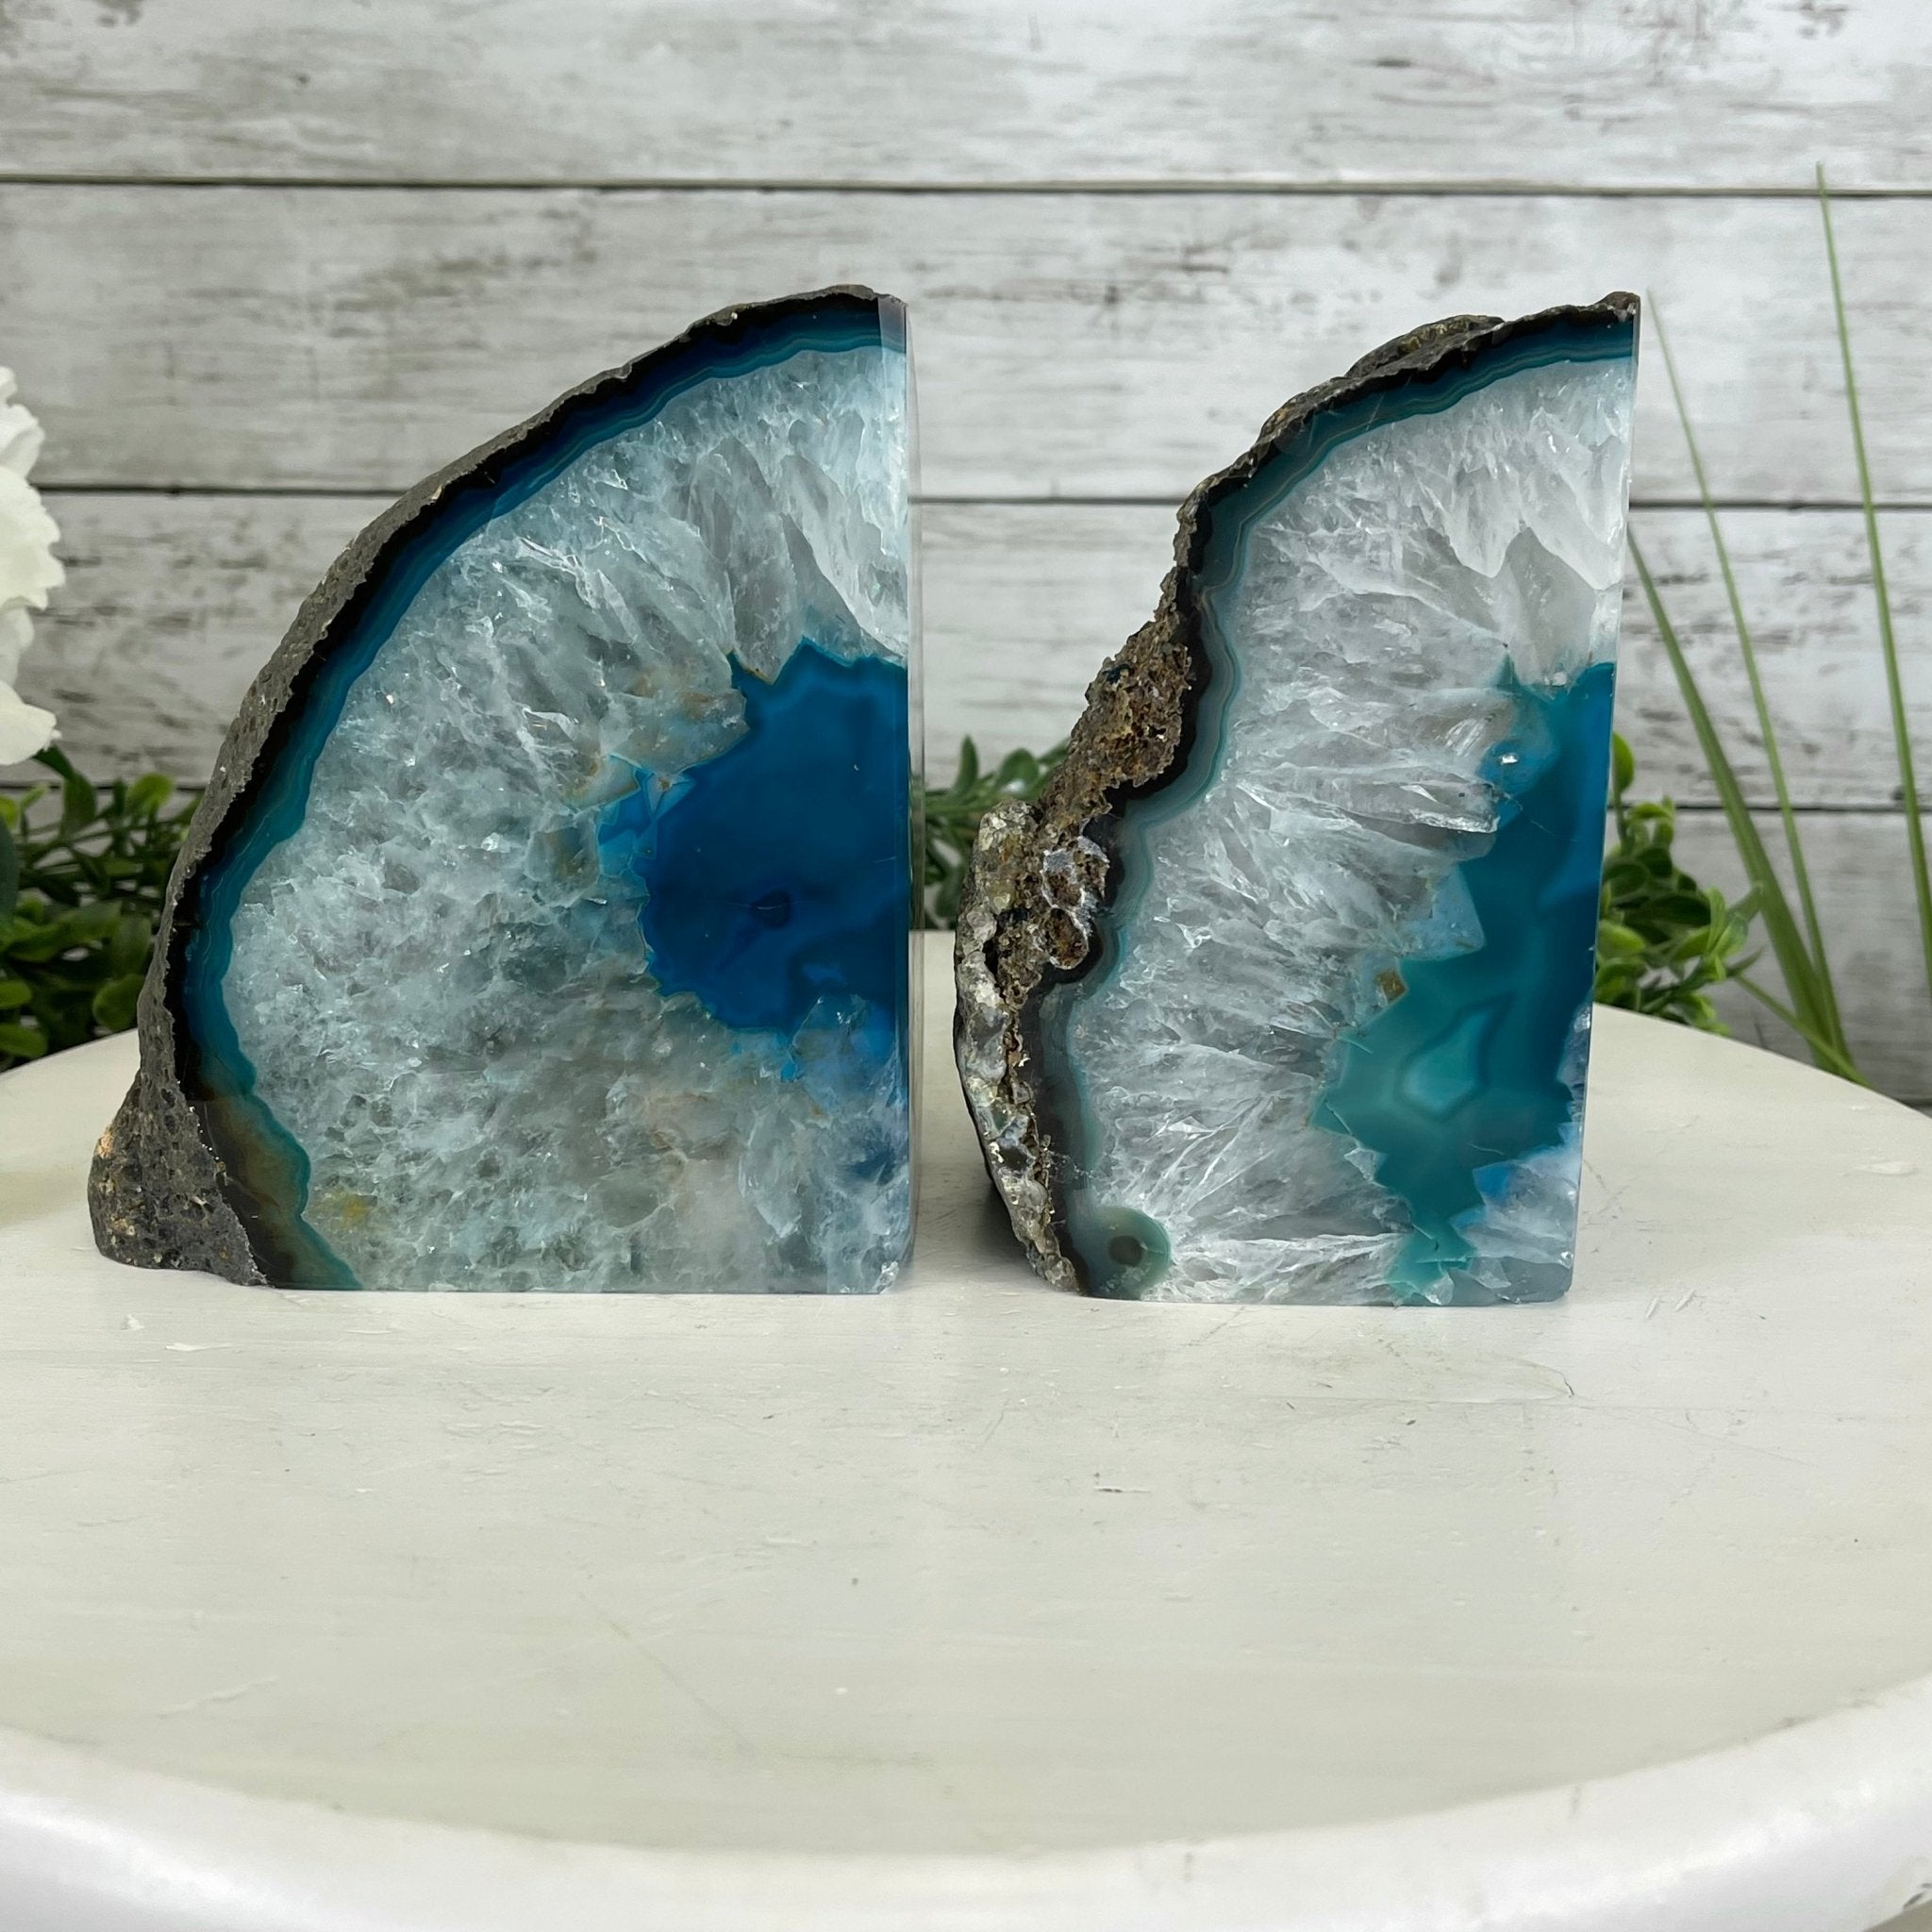 Teal Dyed Brazilian Agate Stone Bookends, 9.4 lbs & 5.3" tall Model #5151TL-021 by Brazil Gems - Brazil GemsBrazil GemsTeal Dyed Brazilian Agate Stone Bookends, 9.4 lbs & 5.3" tall Model #5151TL-021 by Brazil GemsBookends5151TL-021